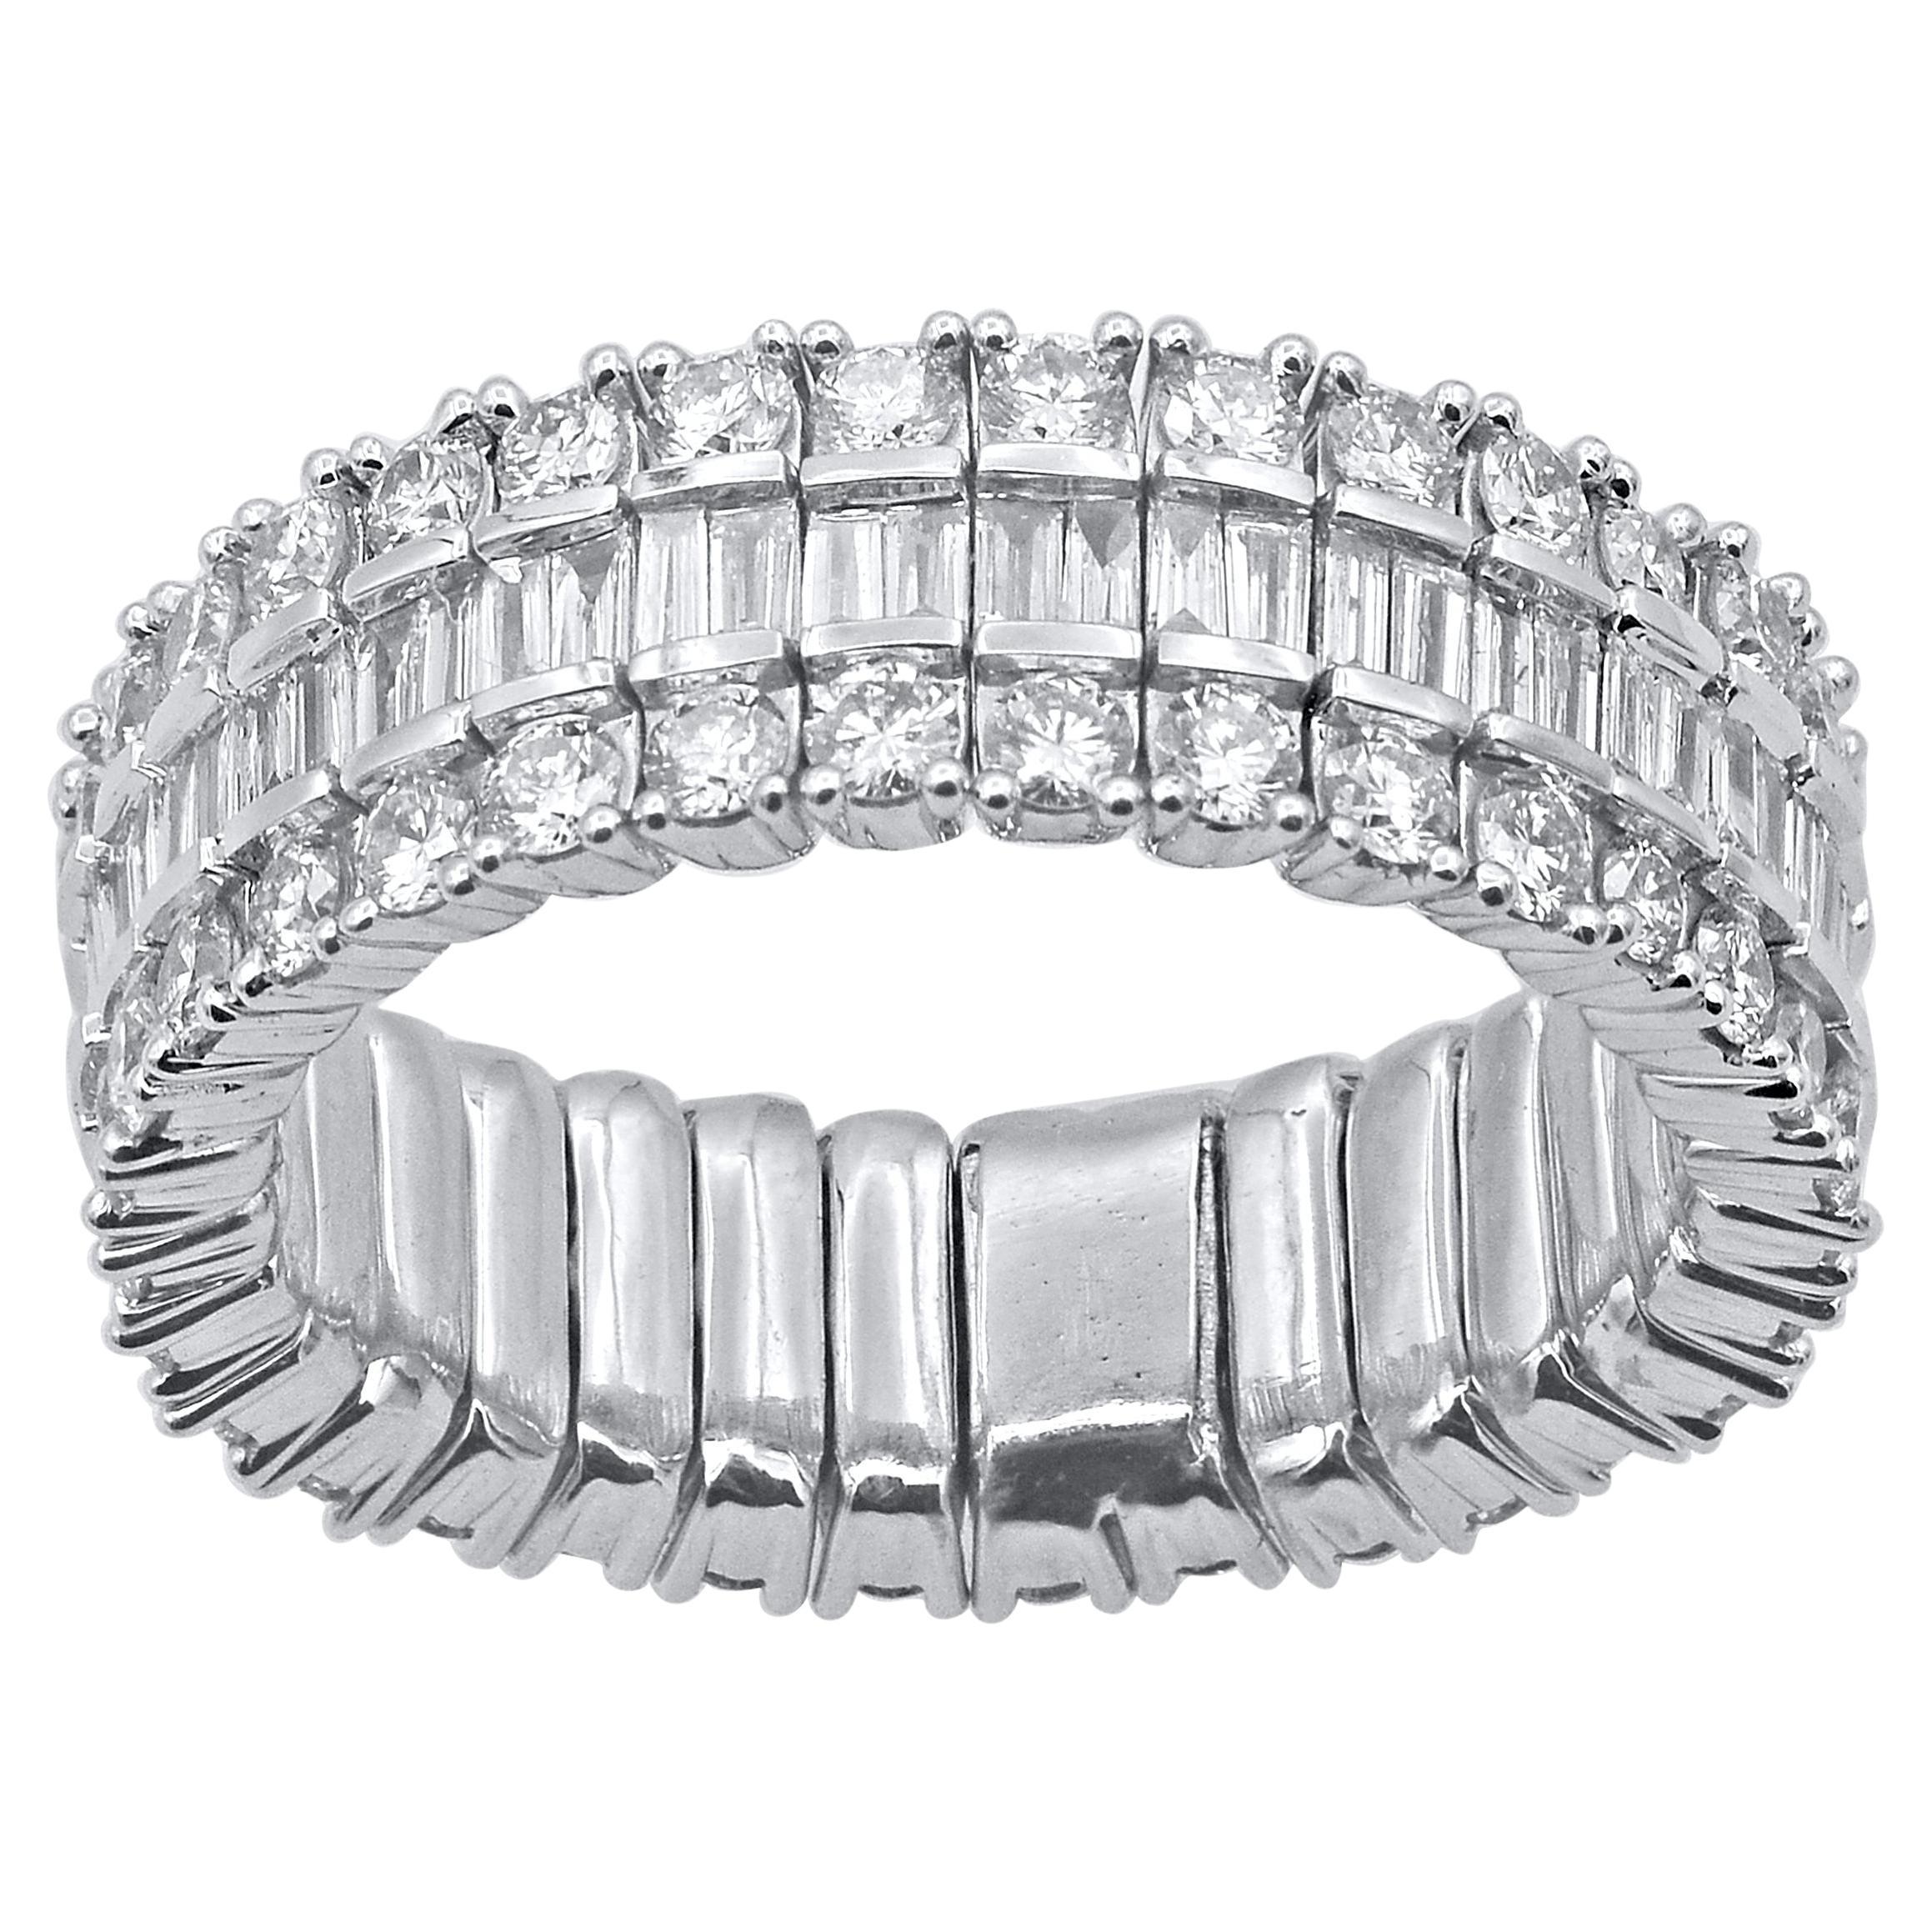 TJD 2.0 Carat Round & Baguette Diamond Eternity Band Ring in 14 Karat White Gold For Sale